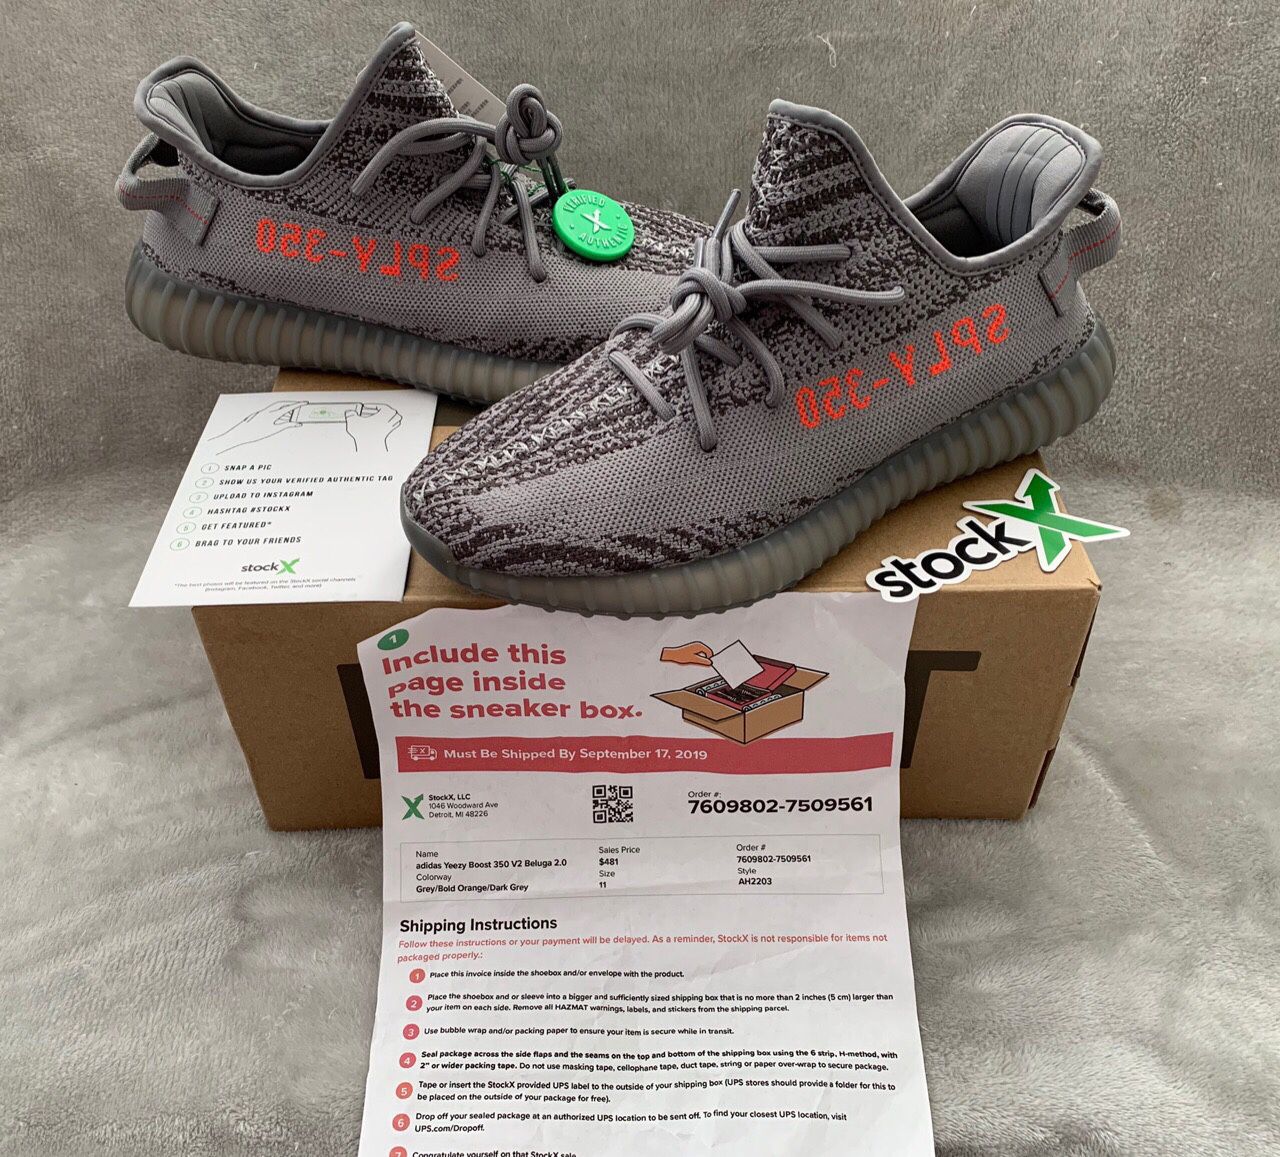 Adidas Yeezy Boost 350 V2 “Beluga 2.0” - Brand New - Never Used Men’s Shoes - Size 11